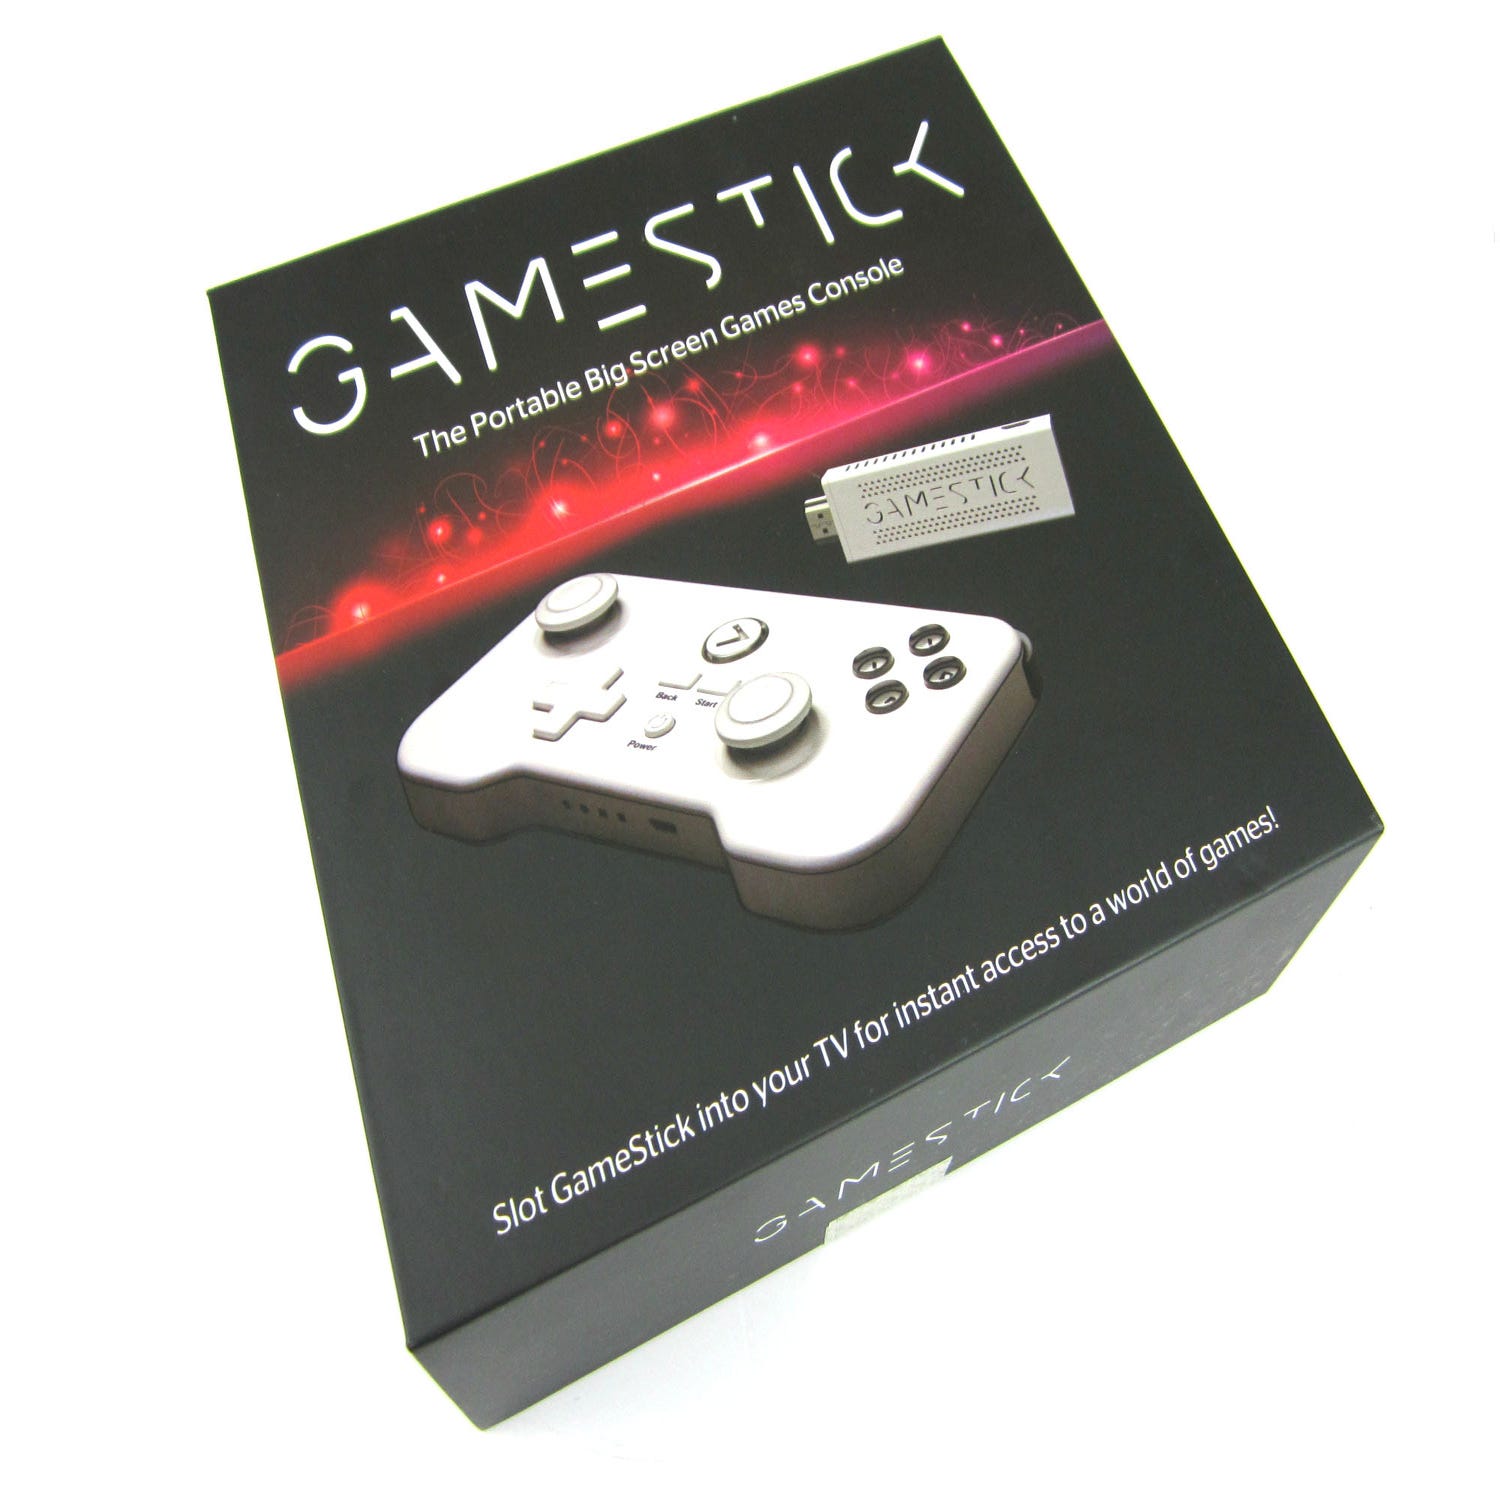 GameStick: The Most Portable TV Games Console Ever Created by